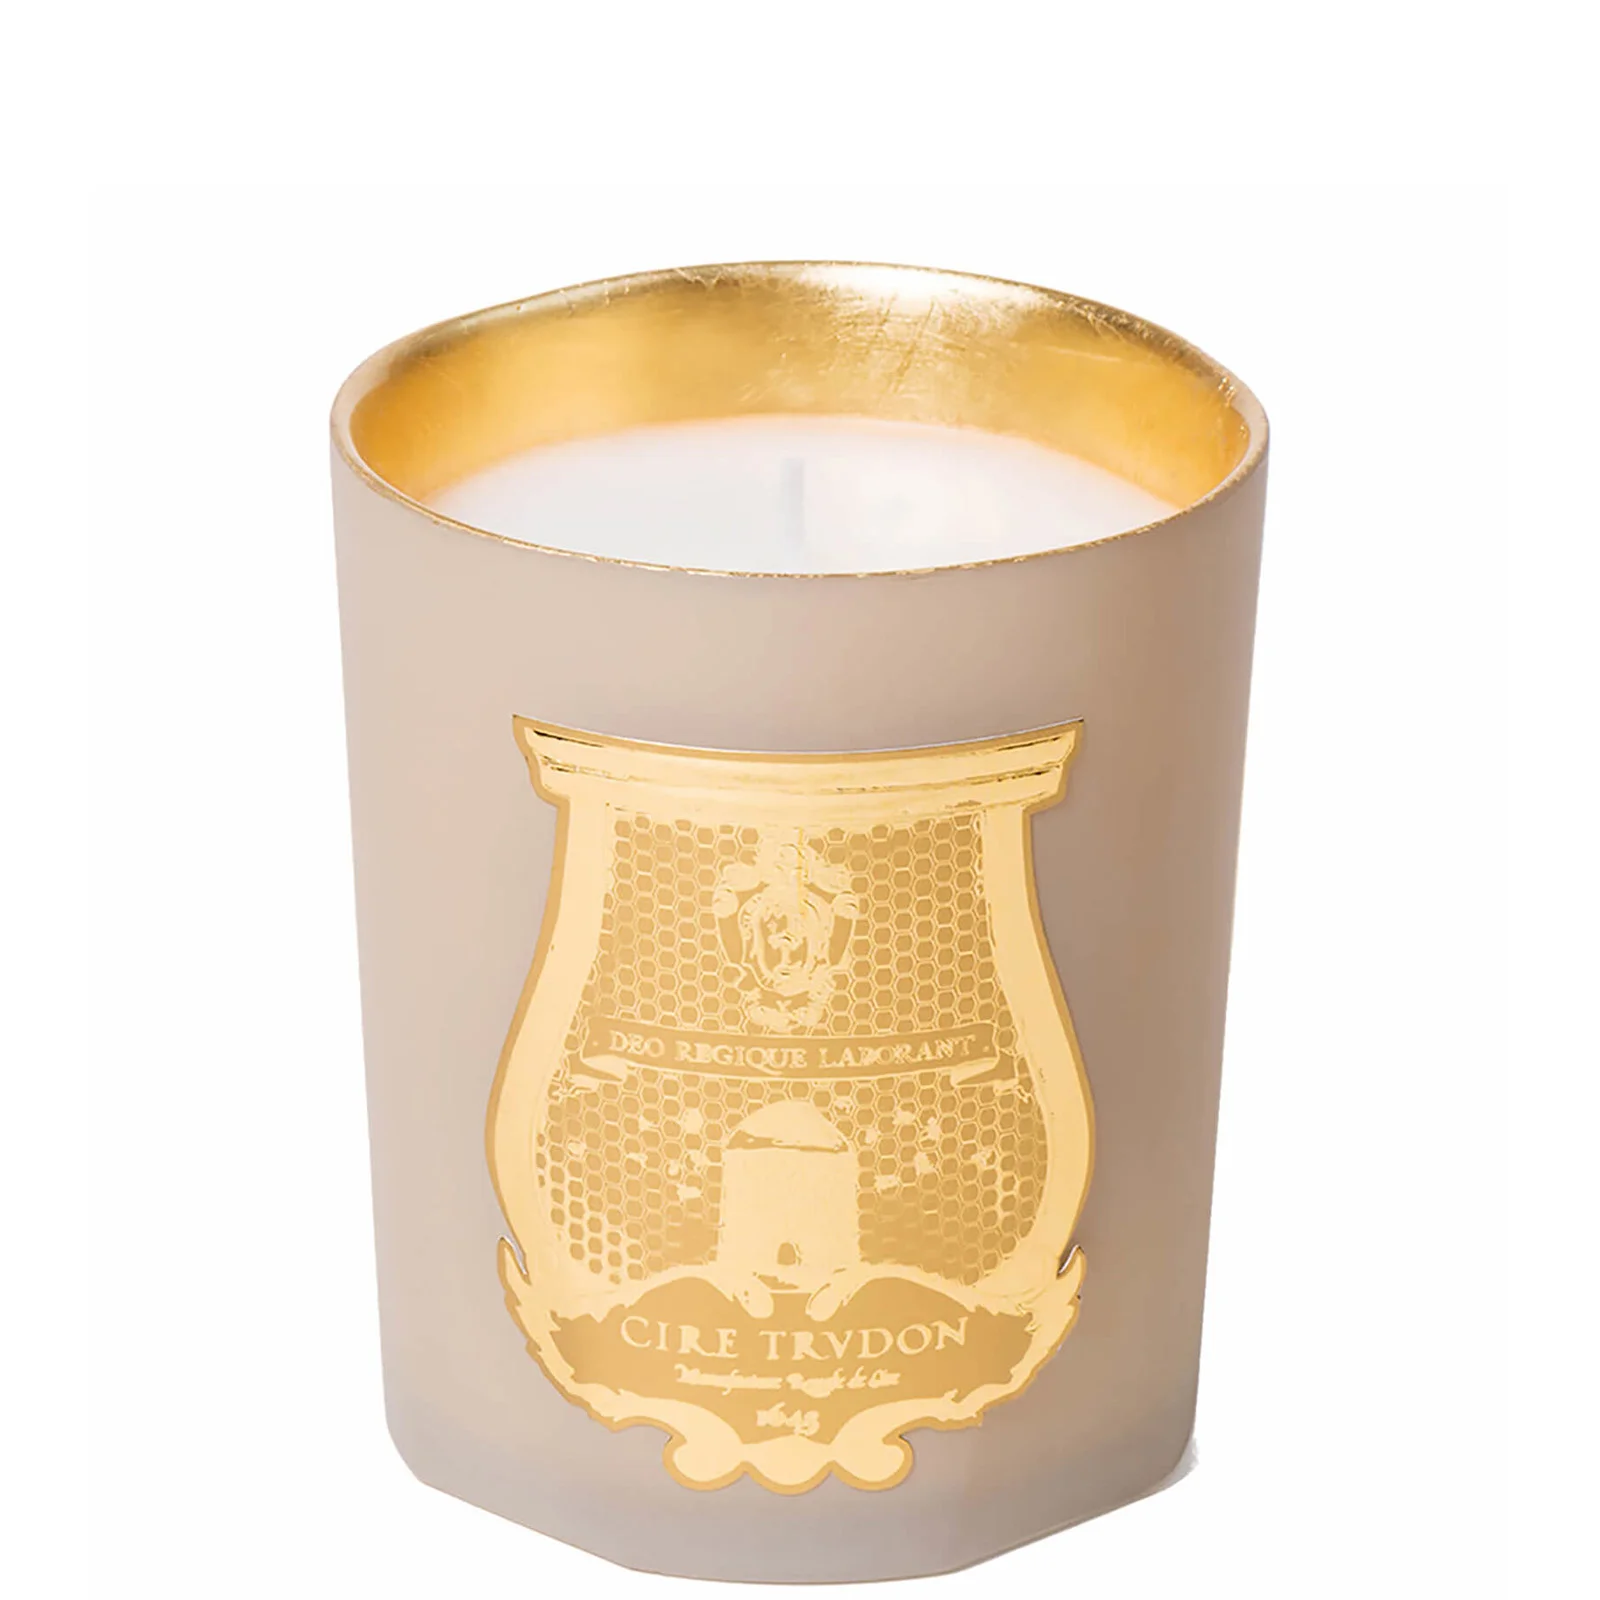 Cire Trudon Philae Candle - 270g Image 1